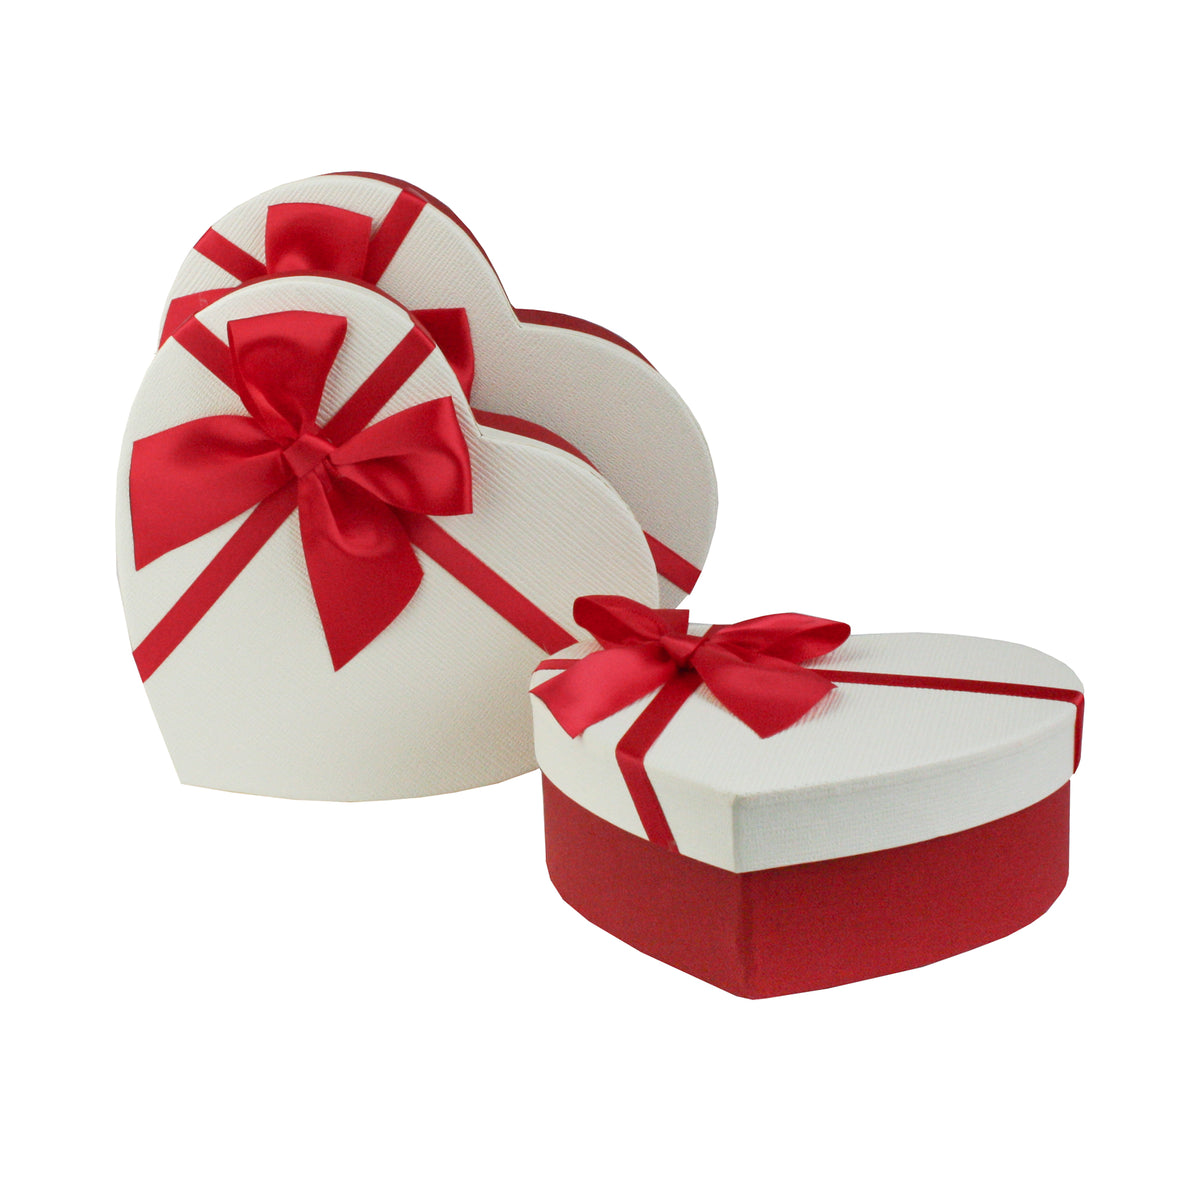 Set of 3 Heart Red/White Gift Boxes with Red Satin Ribbon